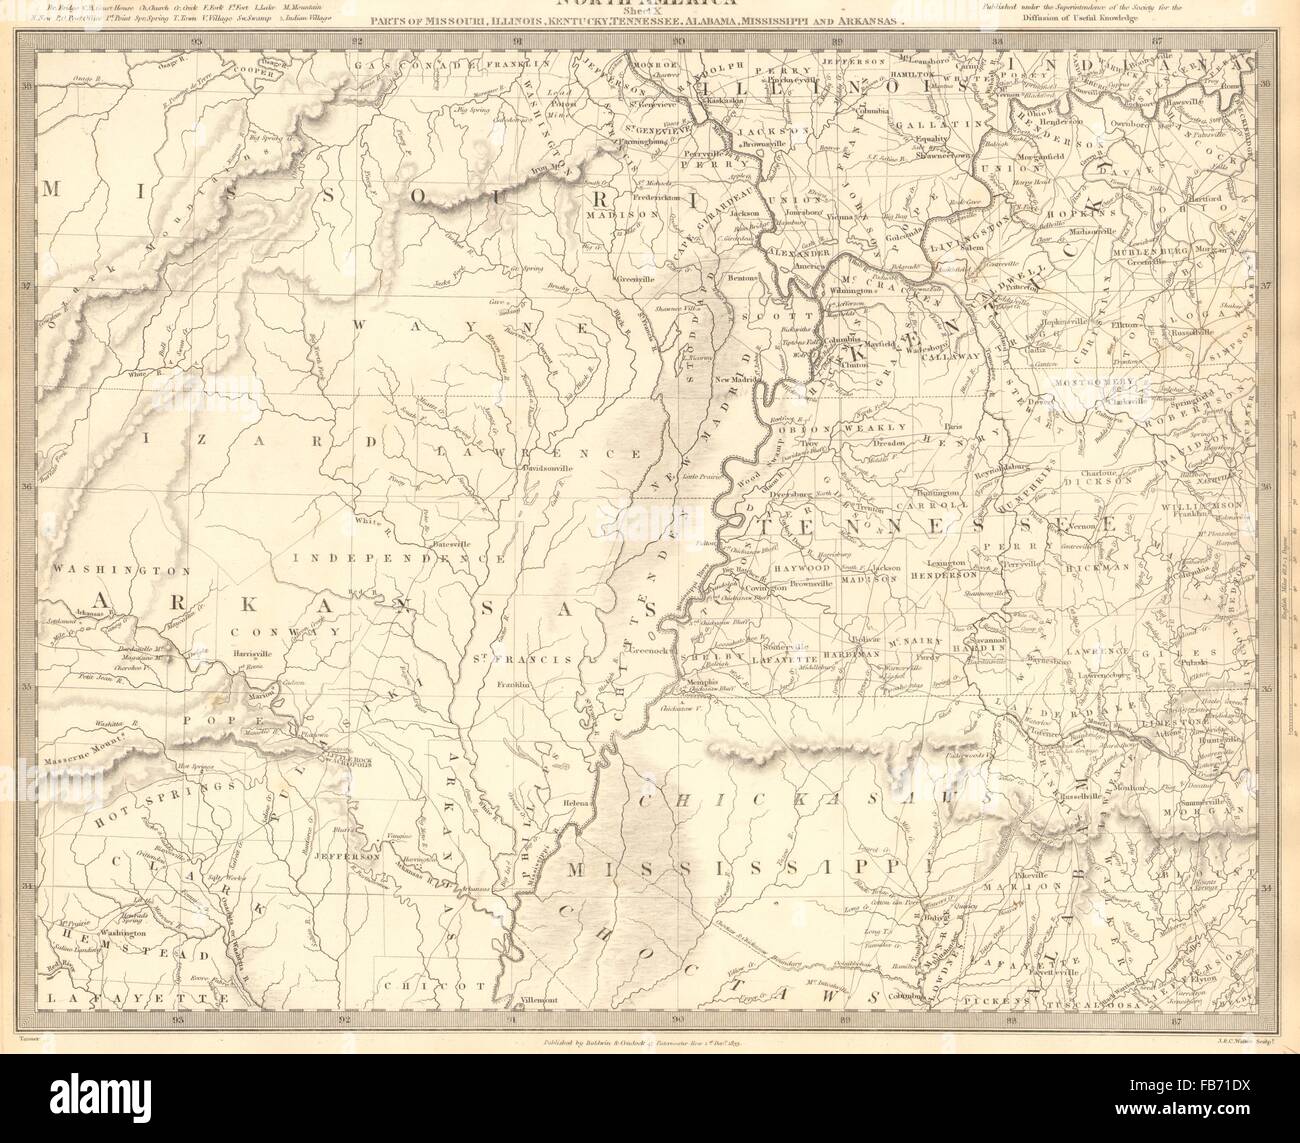 USA: AR MO TN MS IL IN KY AL. Choctaw Chickasaw boundaries. SDUK, 1848 old map Stock Photo